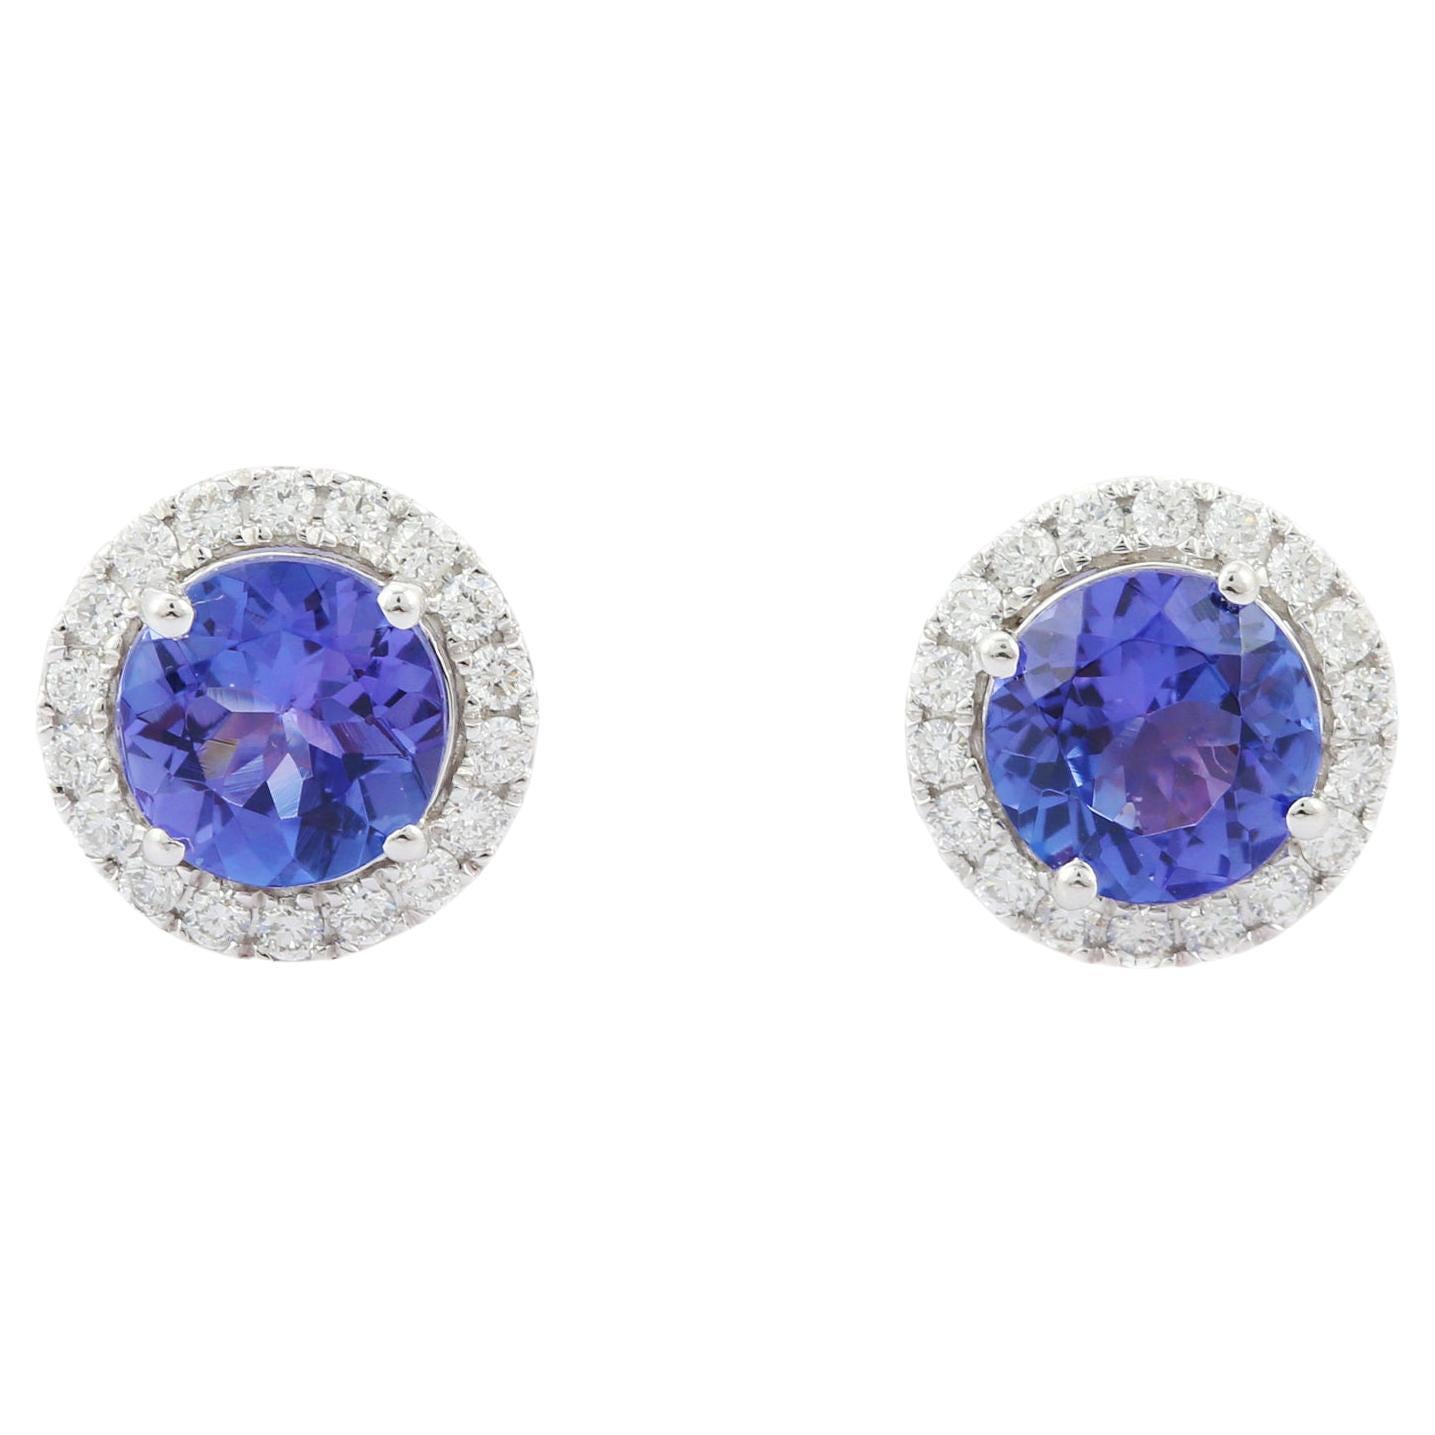 1.65 Carat Round Shaped Tanzanite with Diamonds Stud Earrings in 18K White Gold For Sale